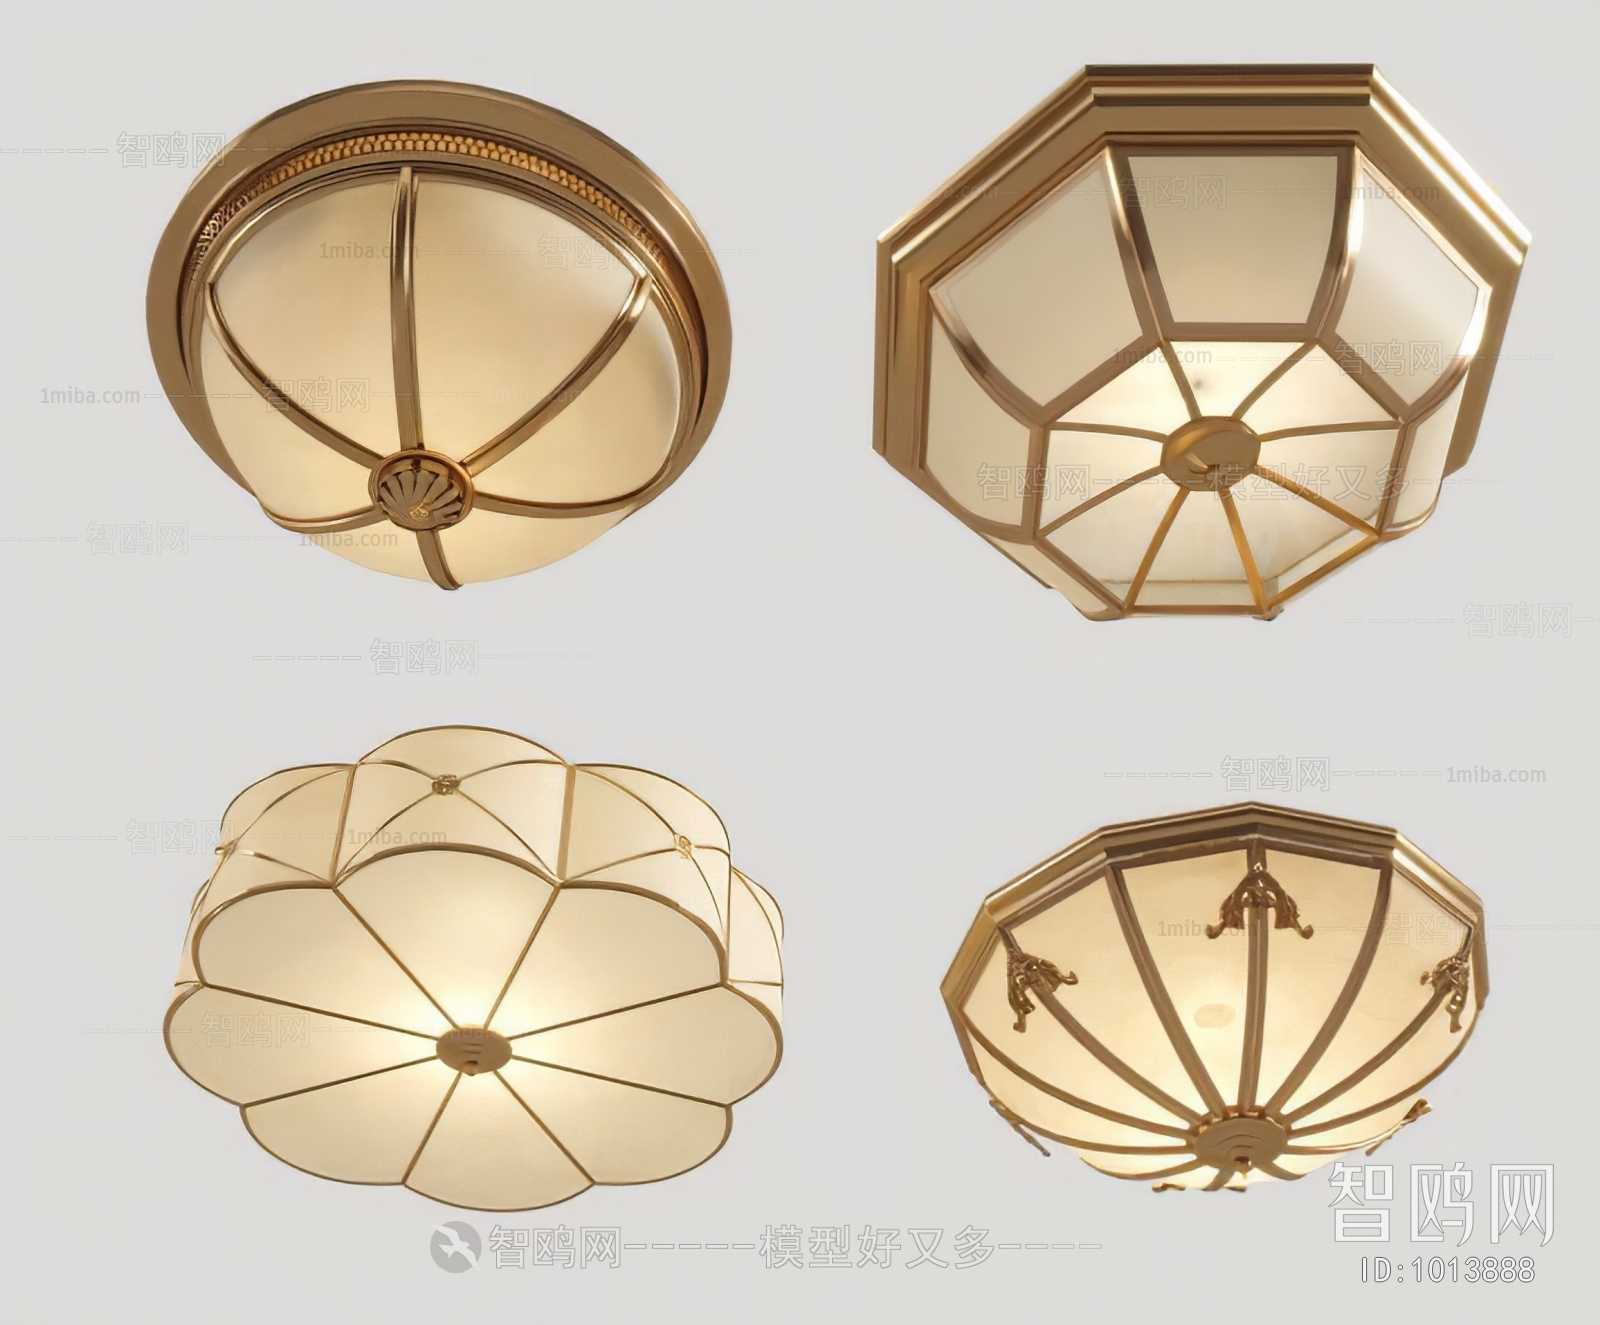 American Style Ceiling Ceiling Lamp